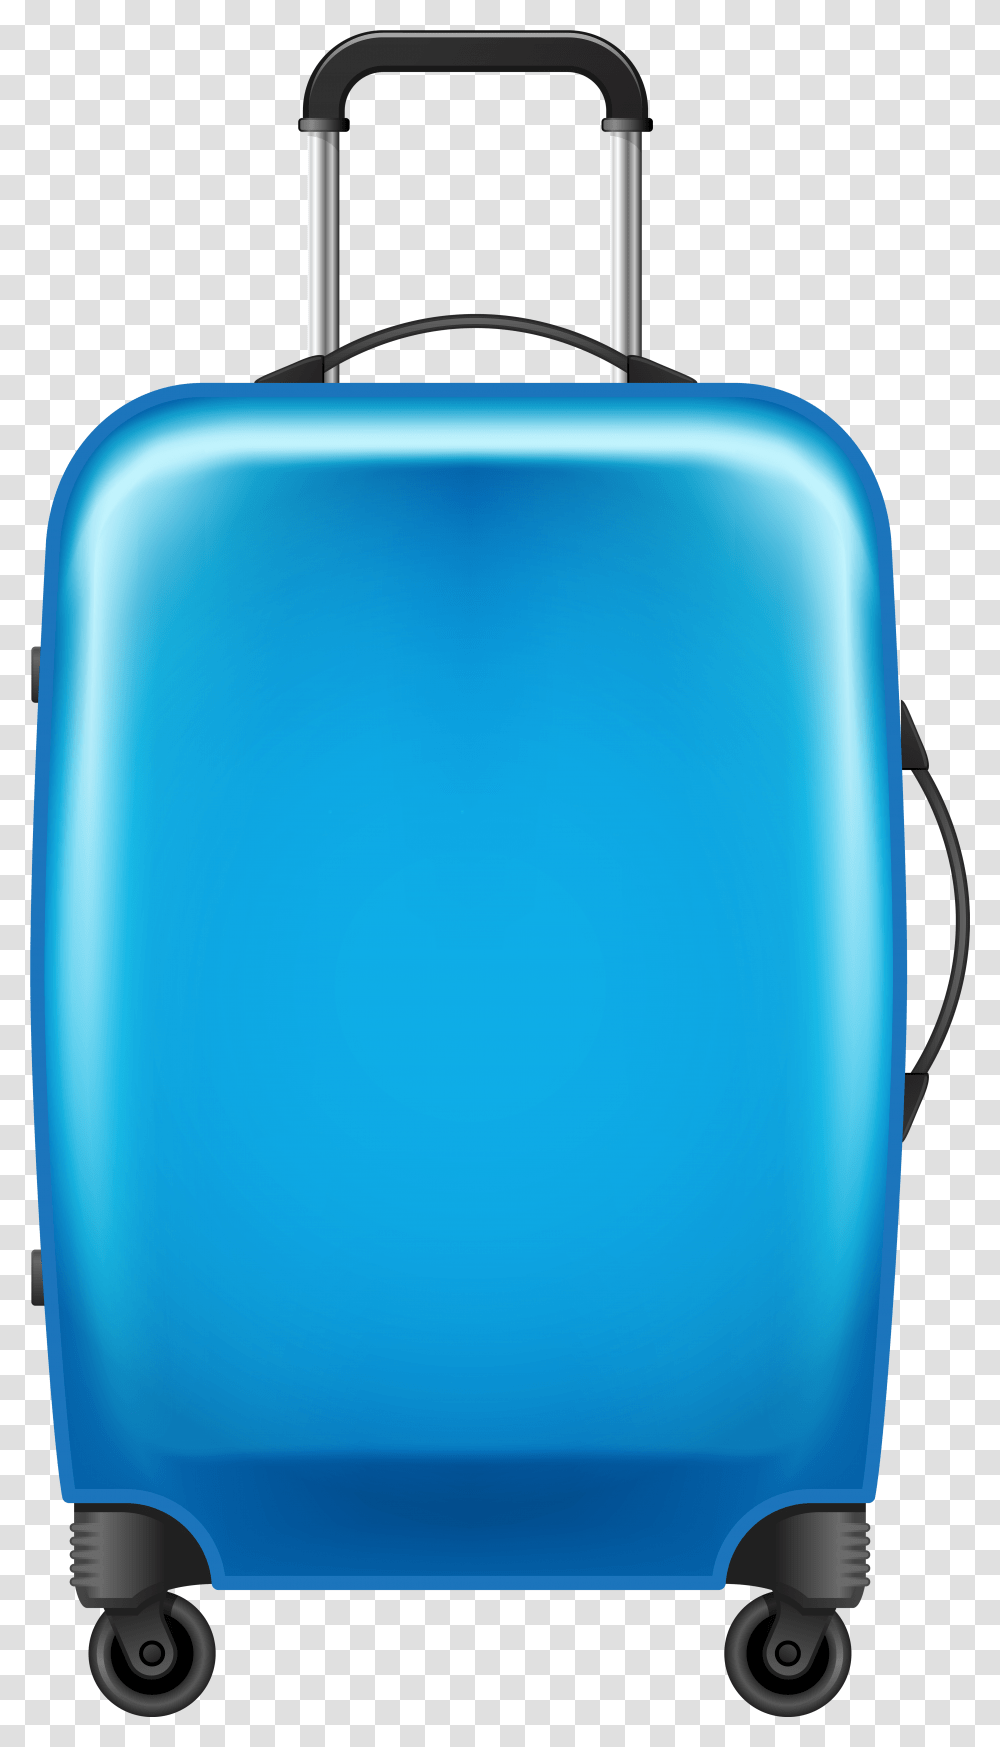 Suitcase Baggage Trolley Bag Tag Travel Trolley Travel Bag Clipart, Chair, Furniture, Luggage, Jar Transparent Png